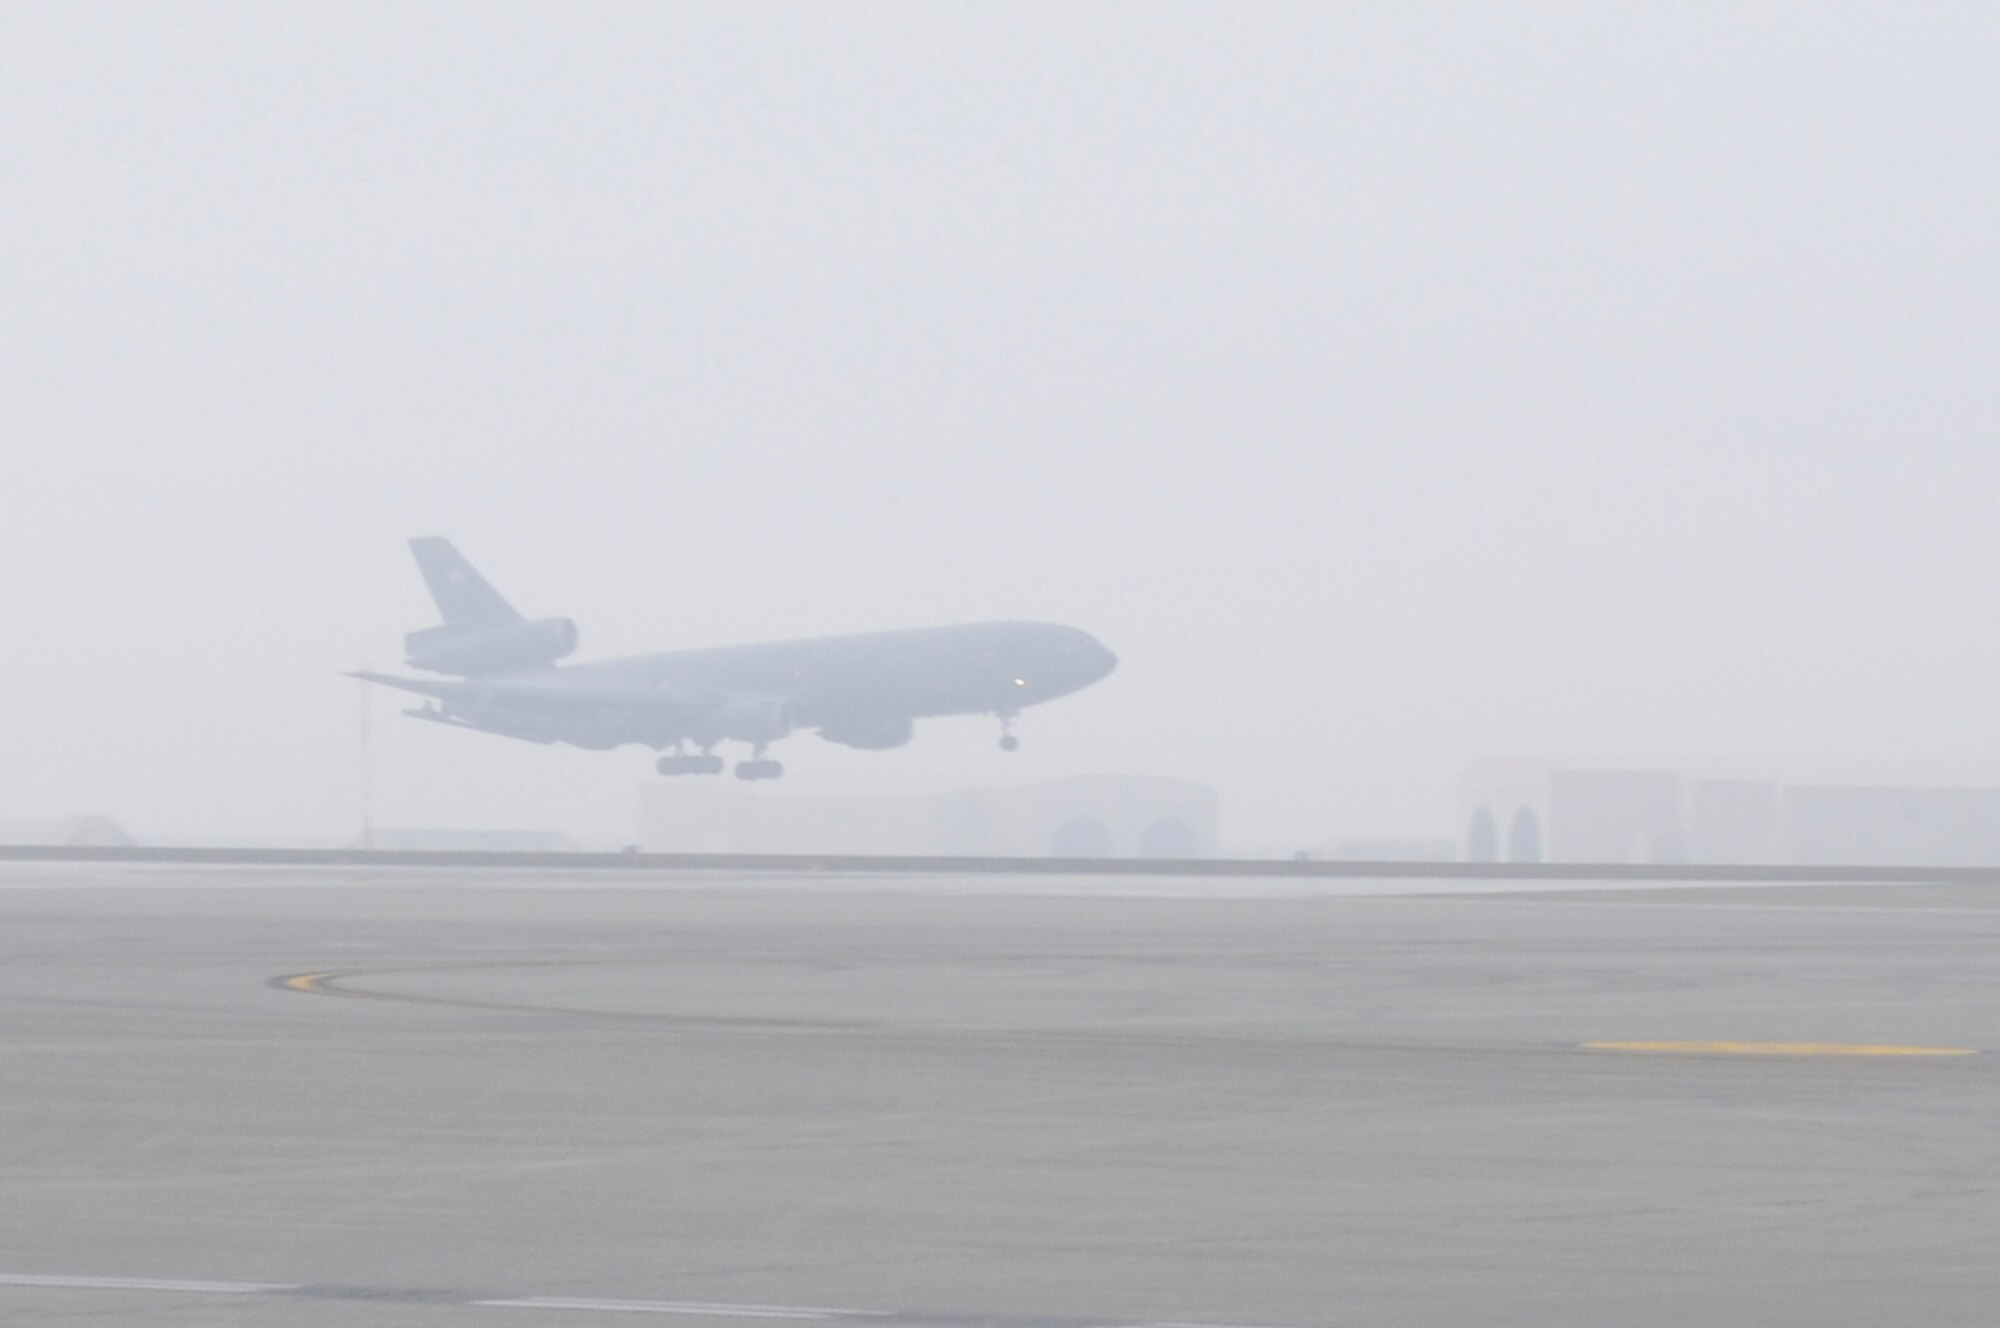 SOUTHWEST ASIA - A KC-10 Extender comes in for a landing at the 380th Air Expeditionary Wing through a haze of fog, Jan 28. The 380th AEW stands mission ready no matter the weather conditions. (U.S. Air Force photo by Senior Airman Brian J. Ellis) (Released)